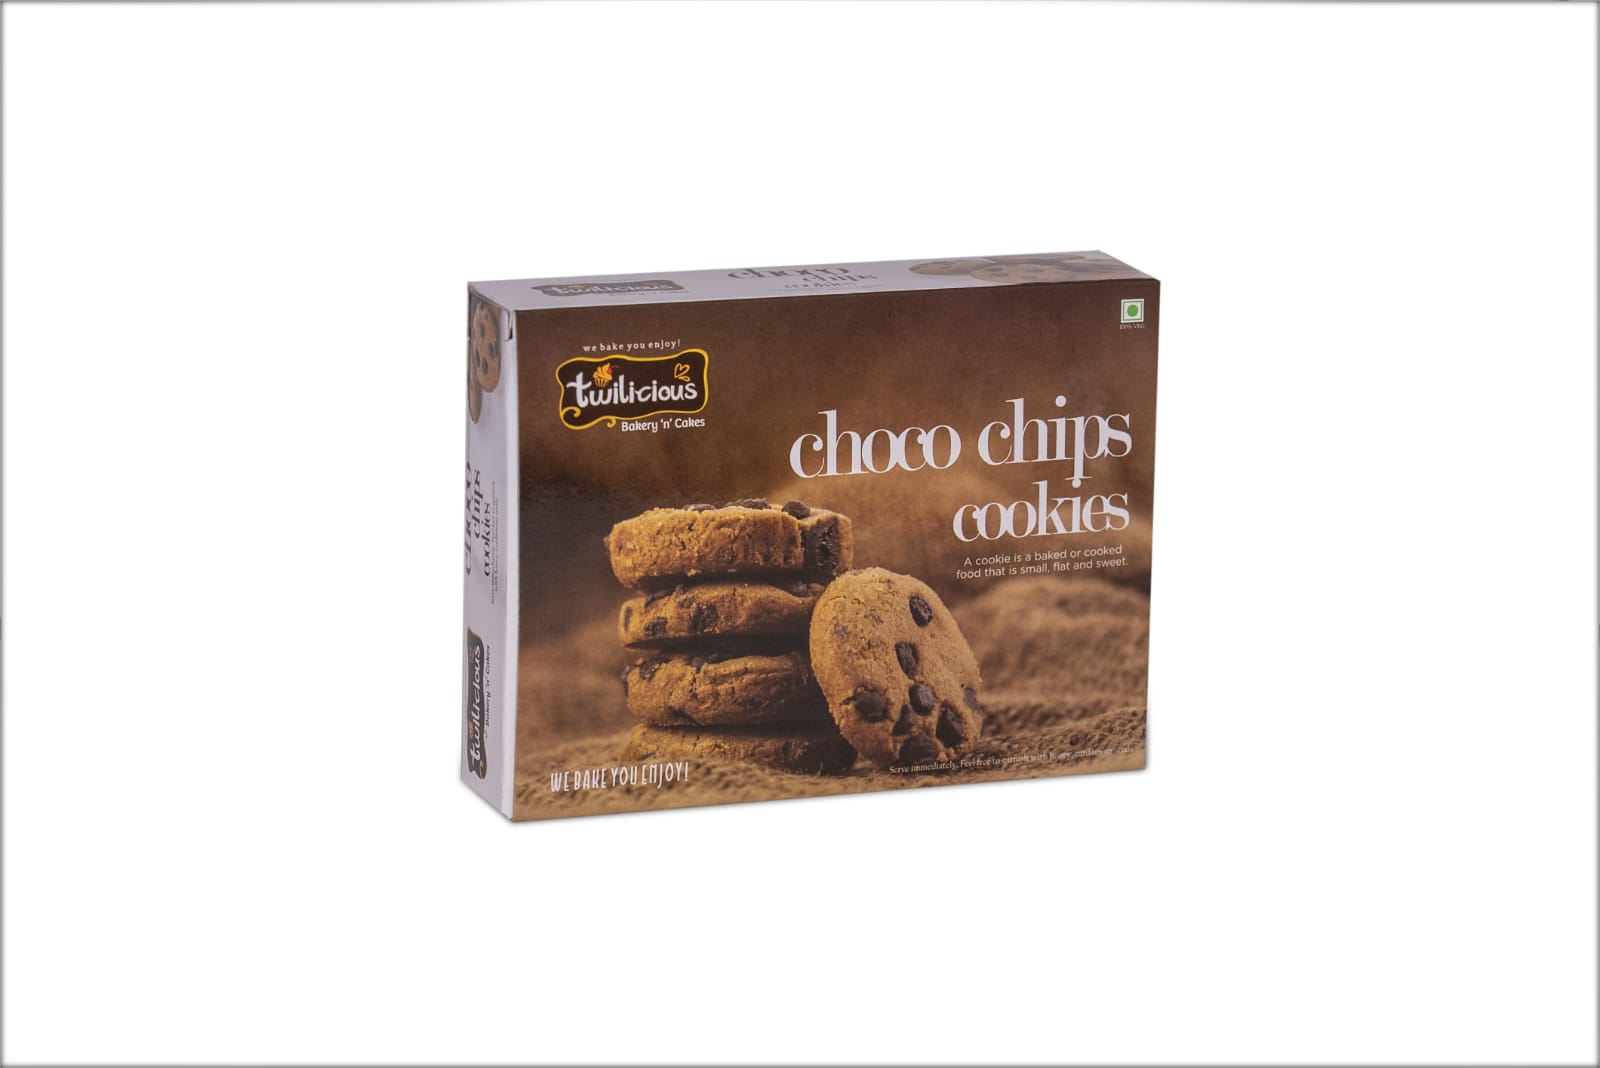 Twilicious Choco Chips Cookies